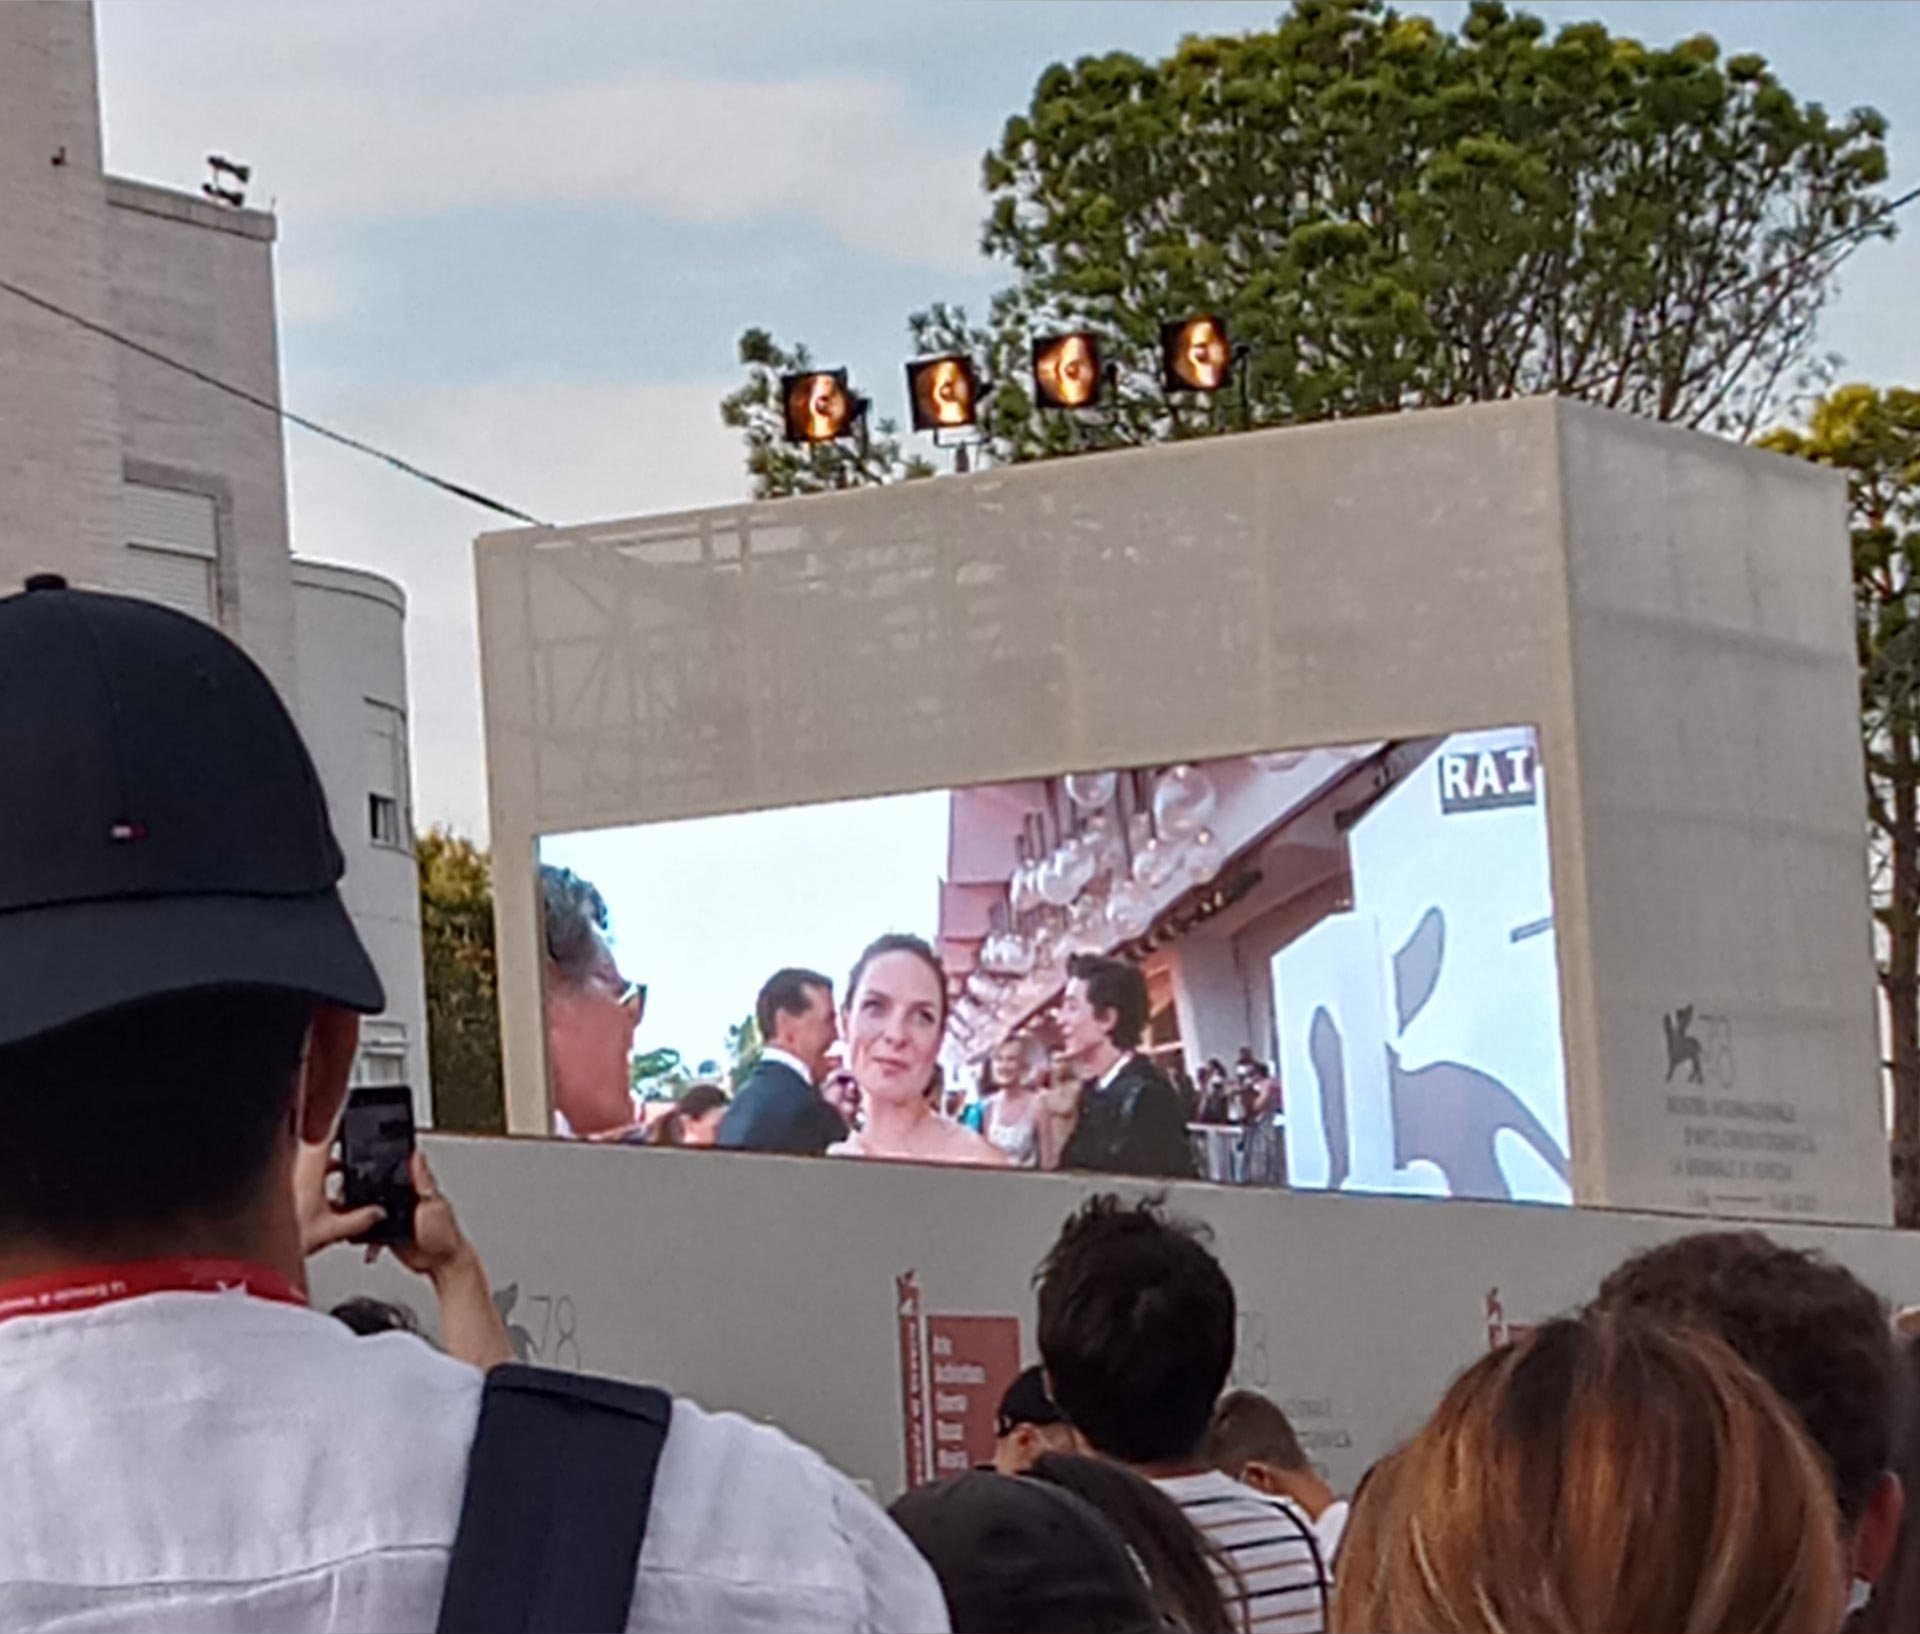 Crowds in Venice watching the Dune movie red carpet proceedings, on a big screen.